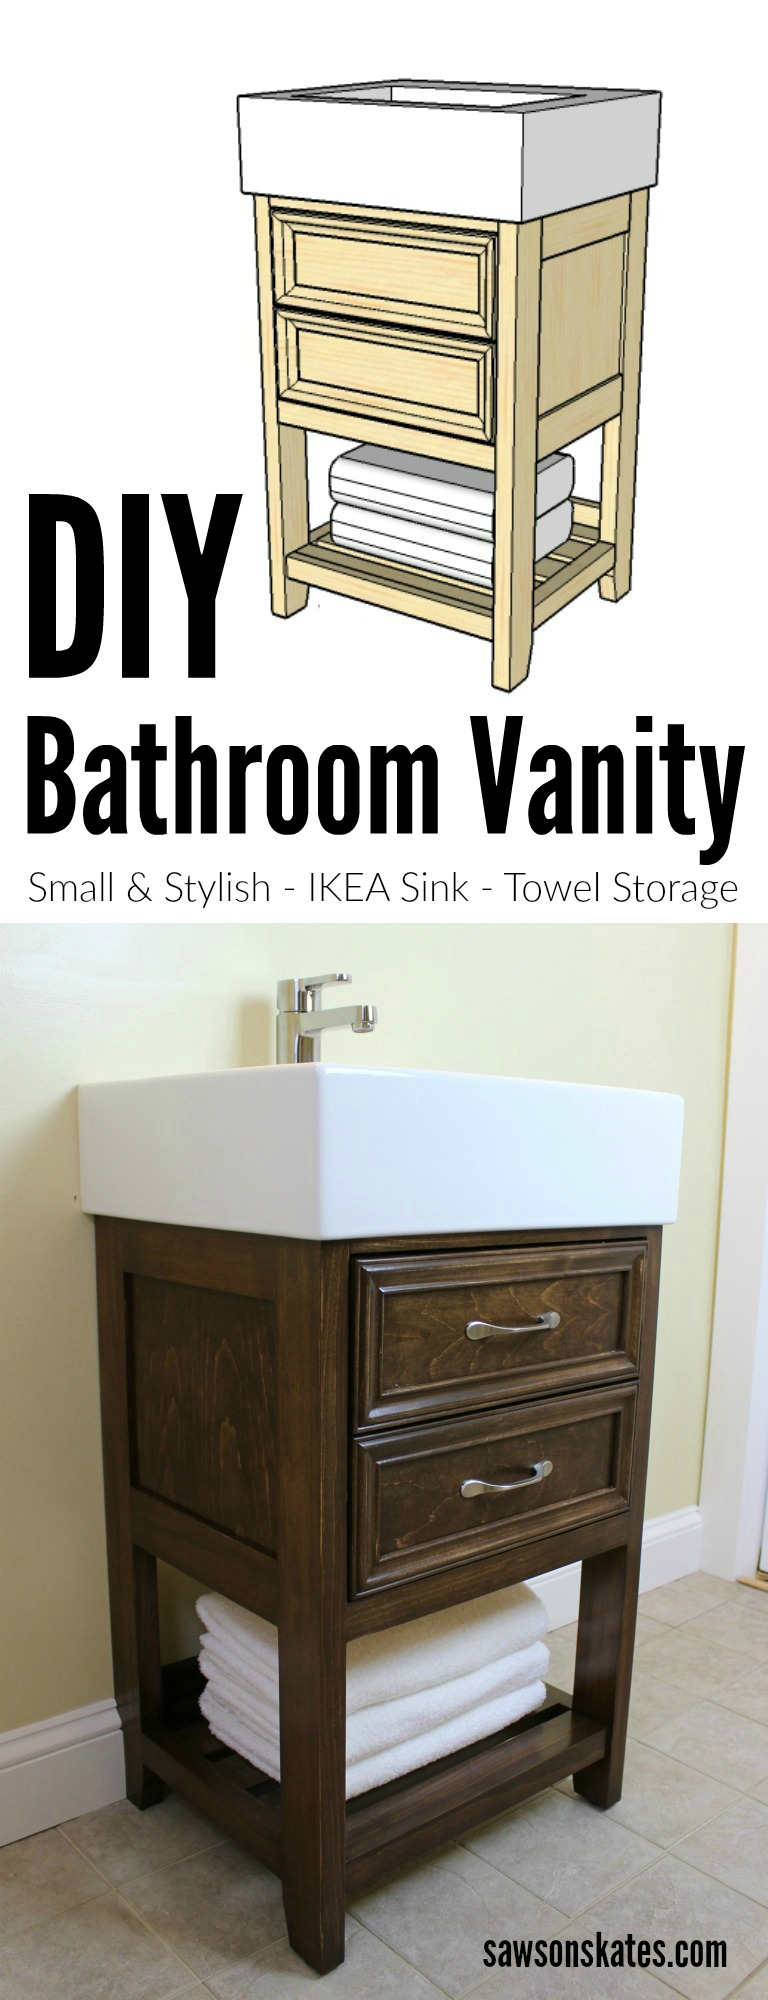 Looking for small DIY bathroom vanity ideas? Check out the plans for this DIY vanity designed to look like a small dresser. It features book-matched panels, faux drawers and an IKEA Yddingen sink. It's BIG on style, but fits in a small space!